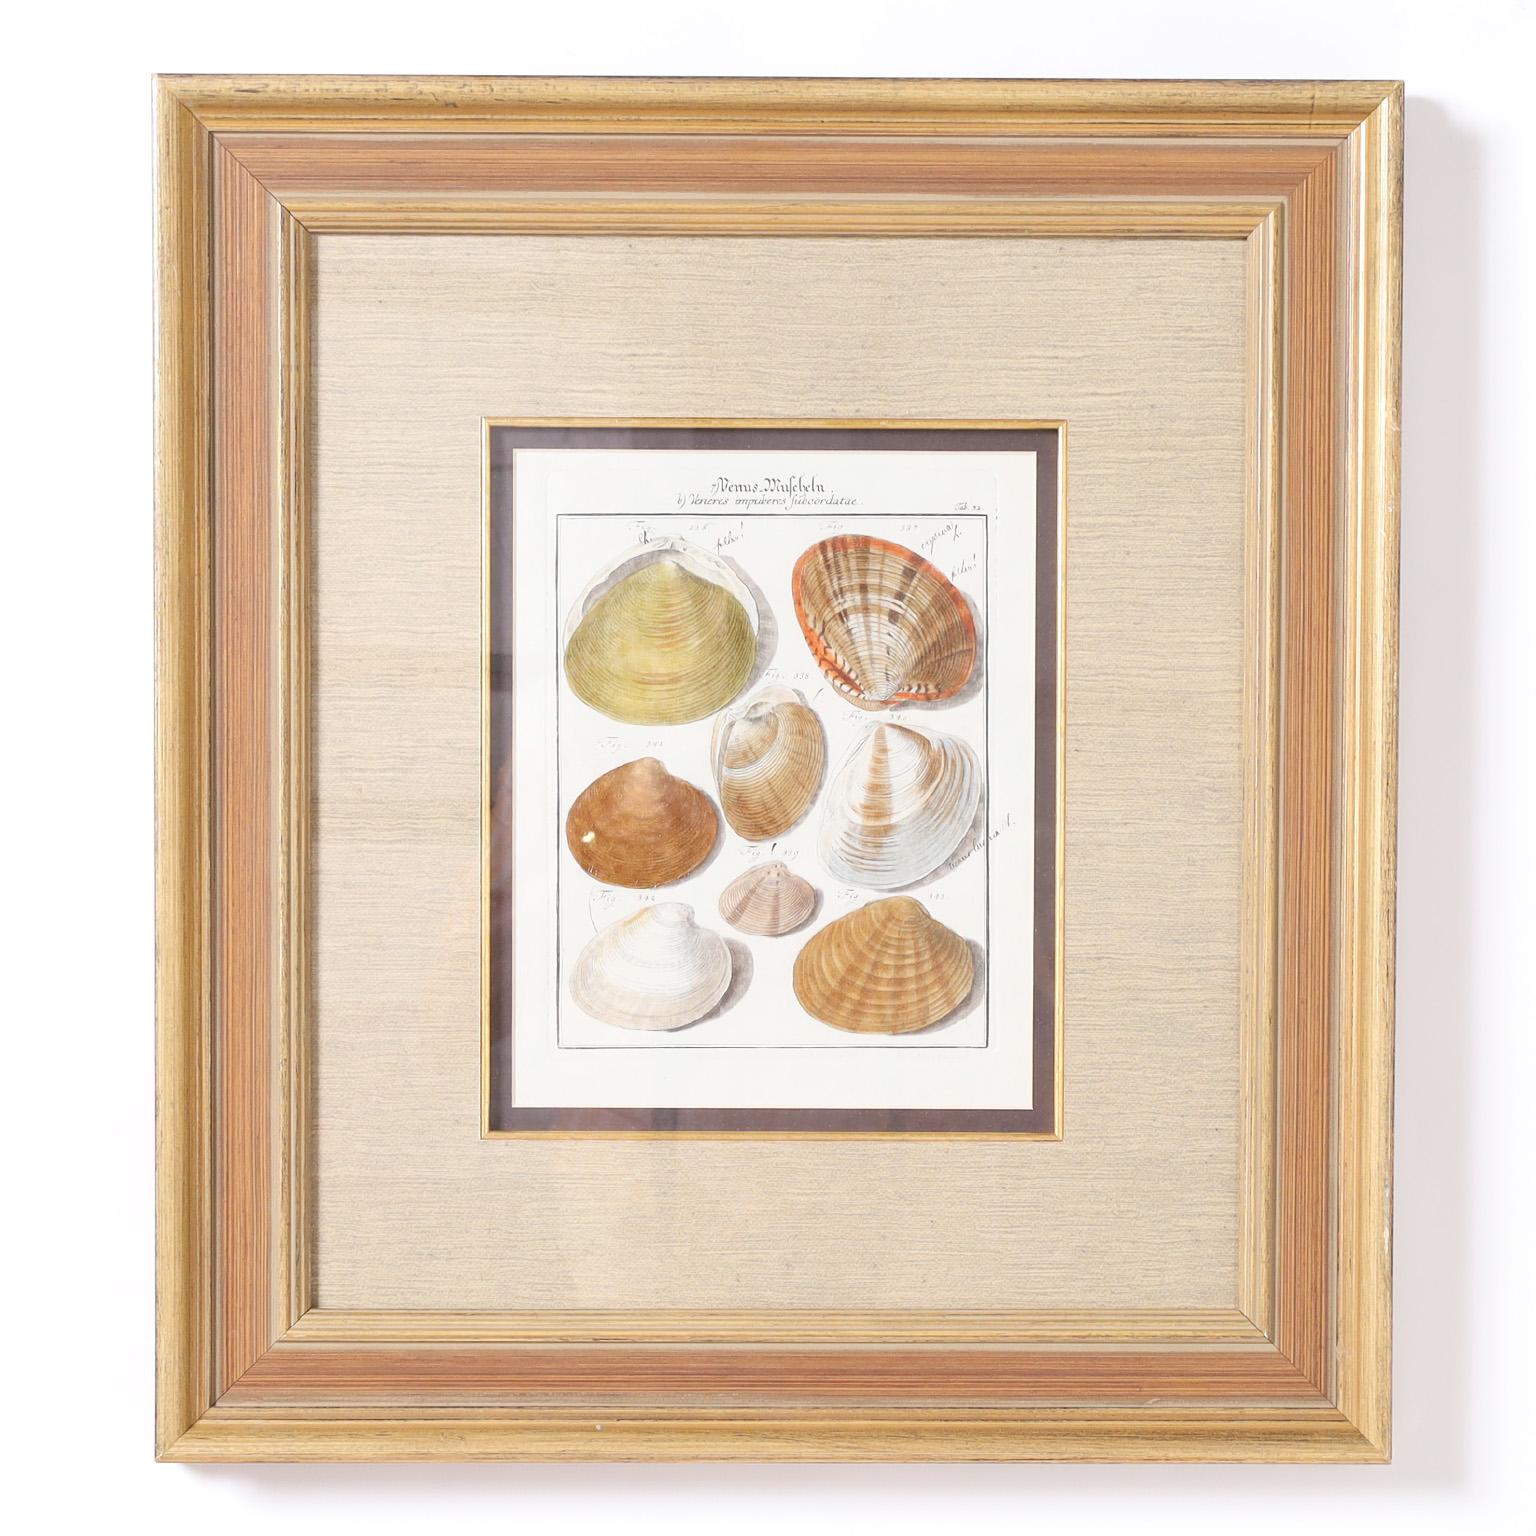 Historic set of three 18th century engravings hand painted in watercolor depicting seashell specimens in an early naturalist style. Presented under glass in wood frames.